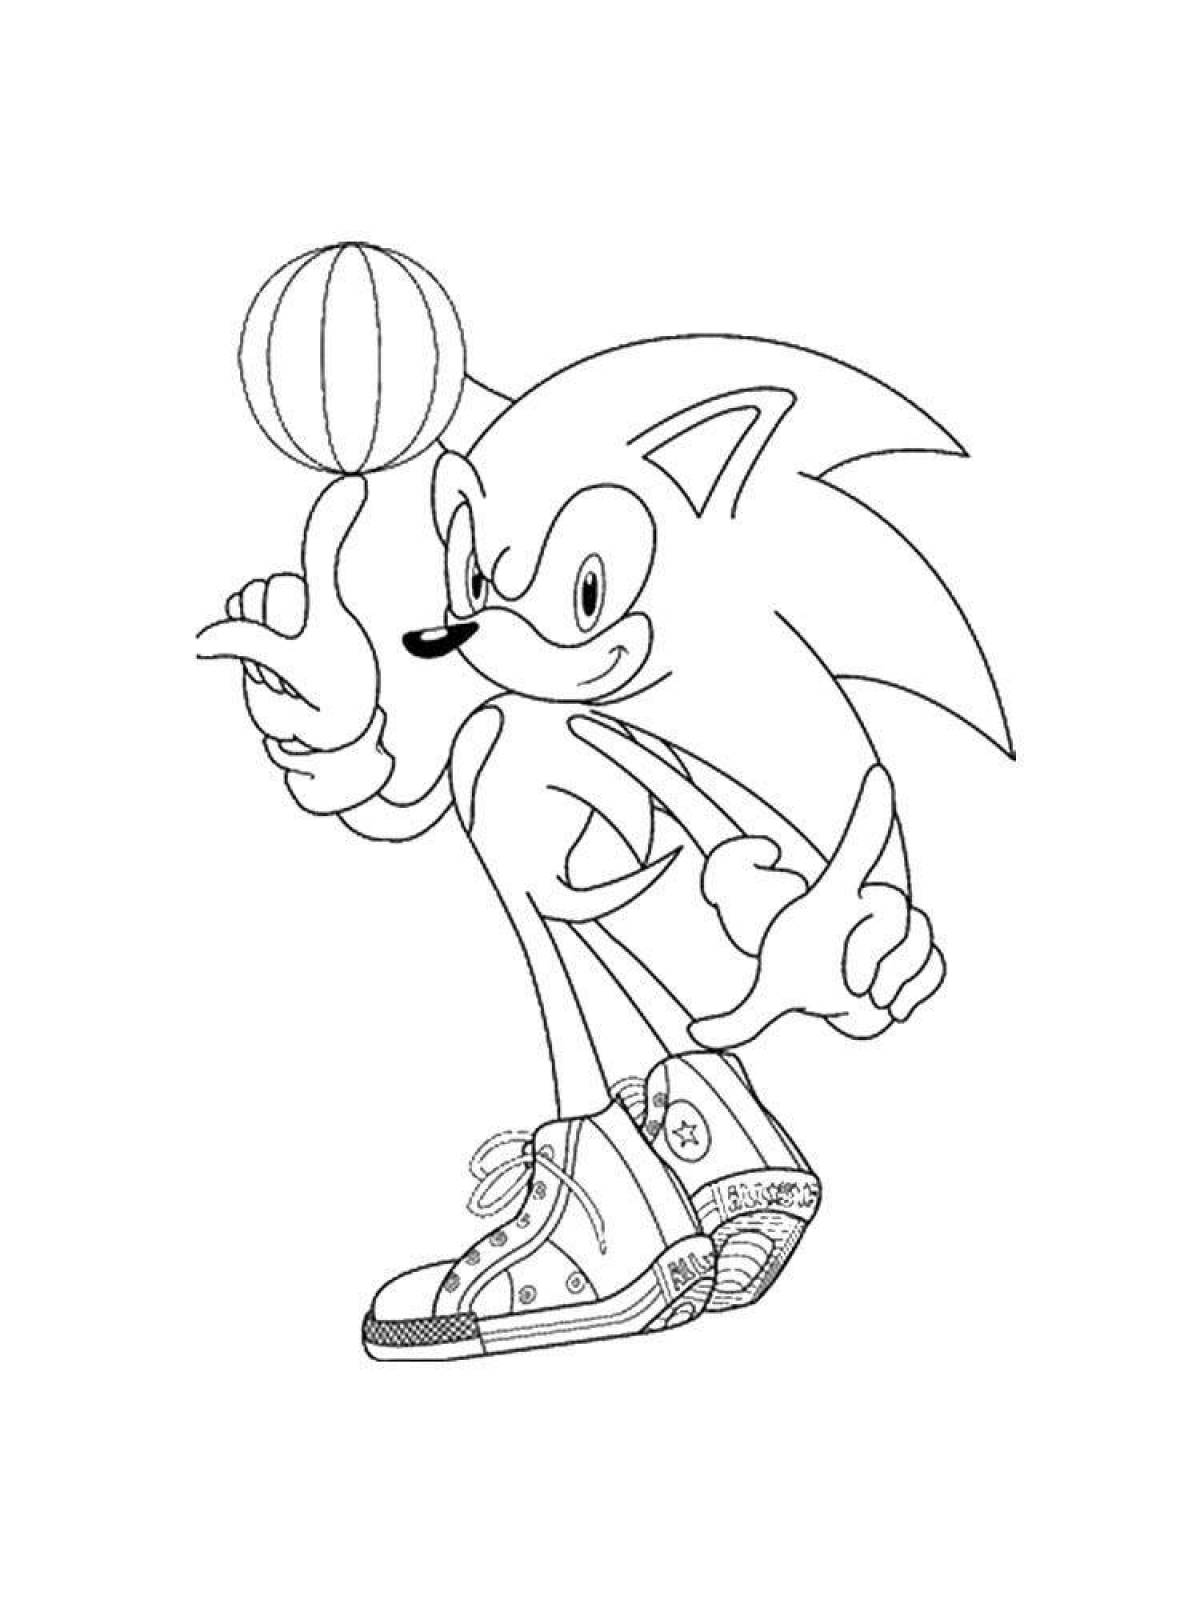 Sonic 2 sweet coloring